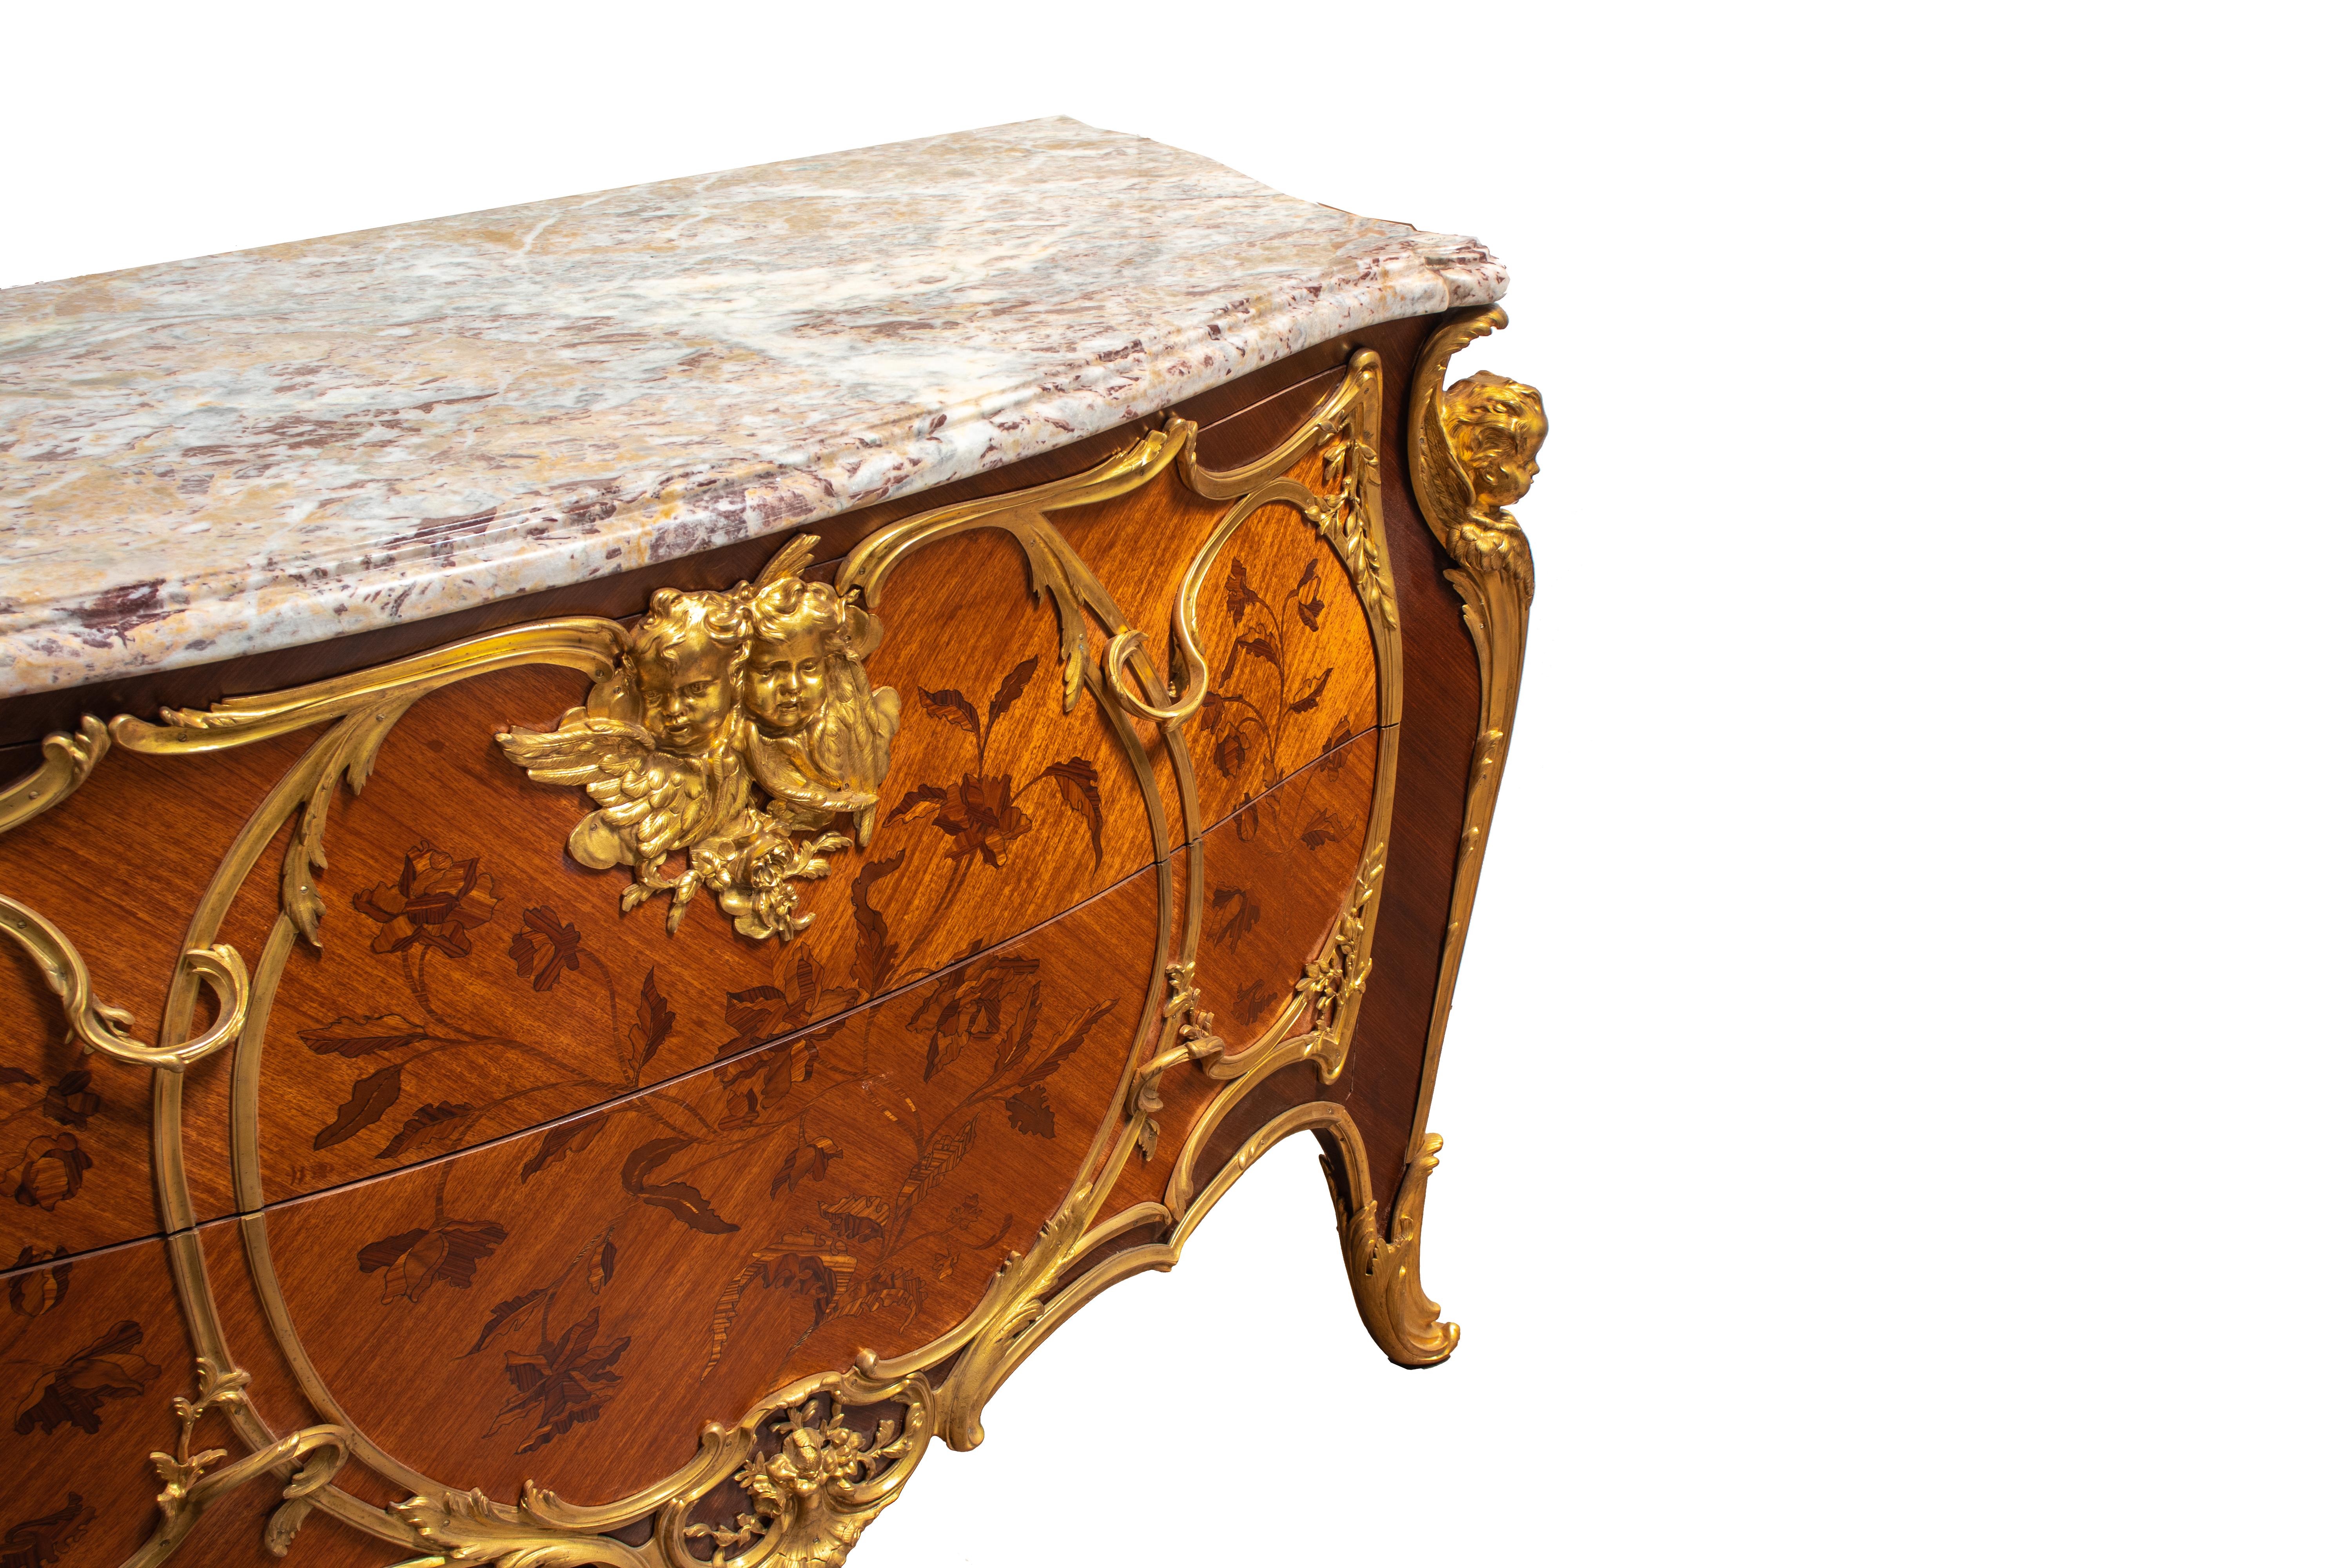 Pair of French Commodes in Louis XV style with Ormolu Mounts and Marquetry In Good Condition For Sale In Dubai, AE